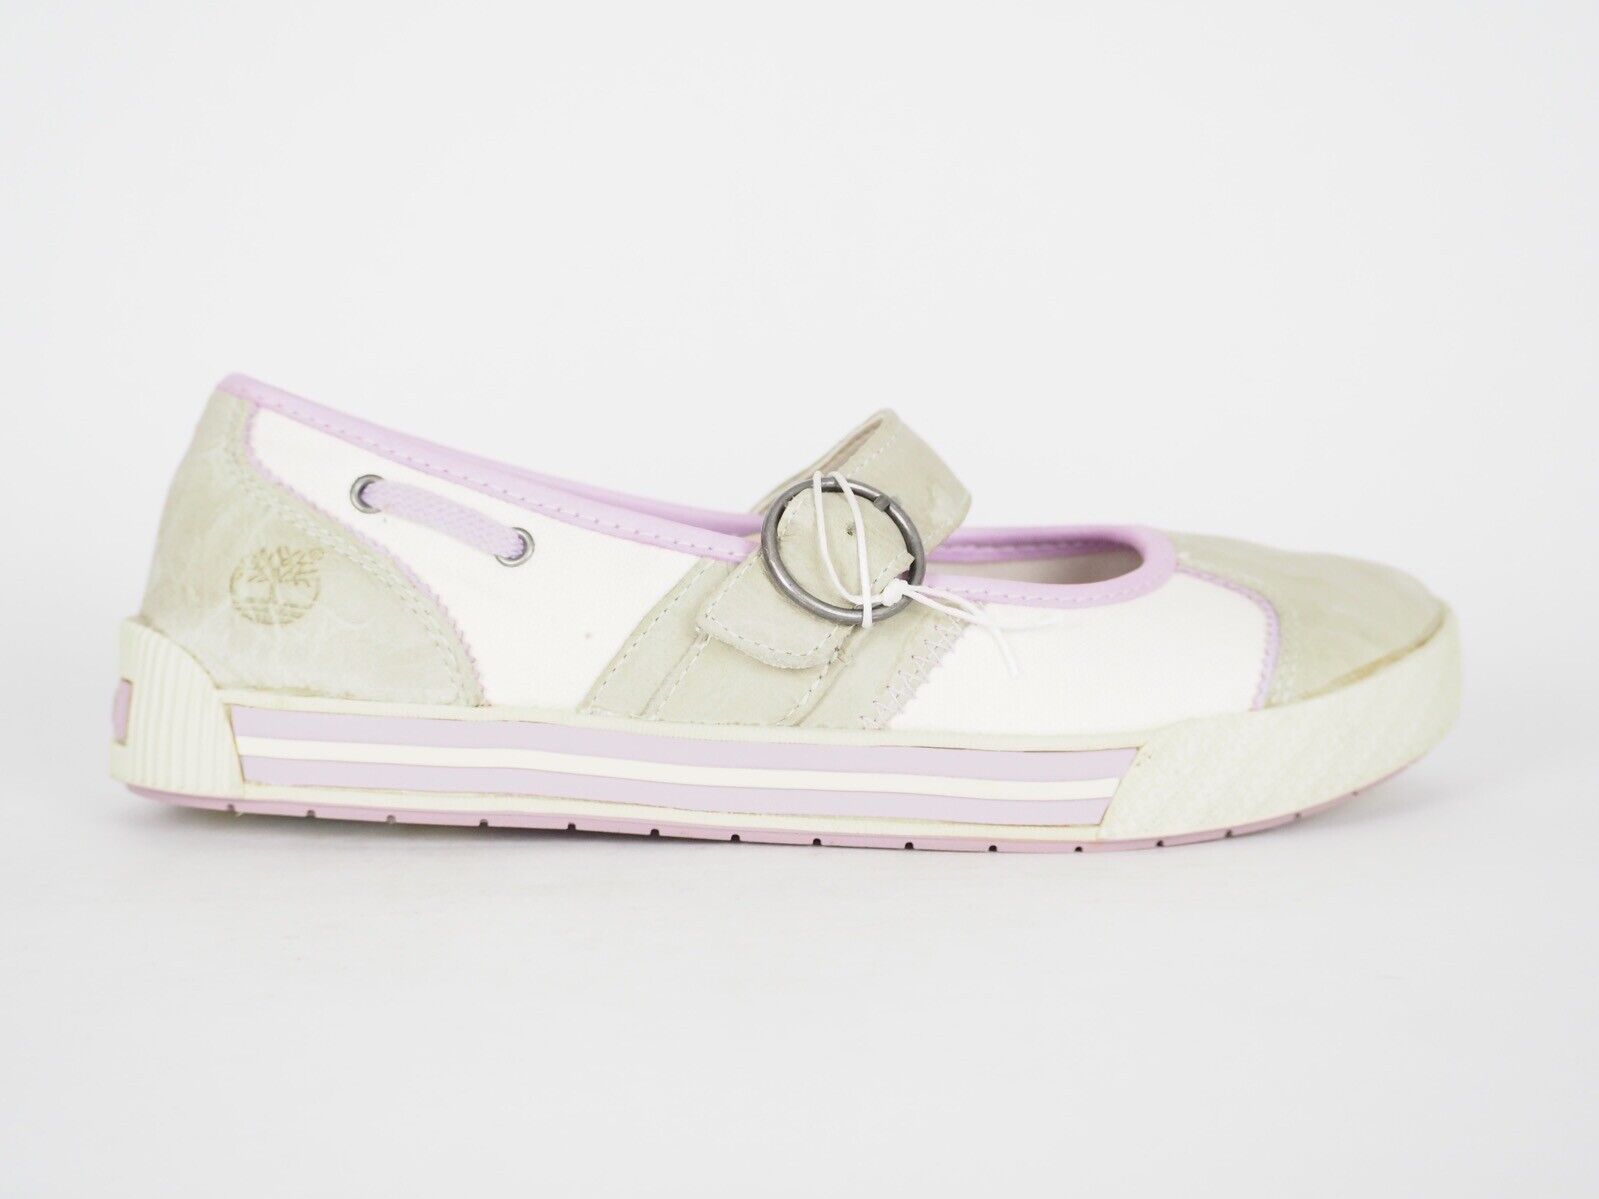 Junior Girls Timberland Metro Network 52952 Grey Leather Mary Jane Shoes UK 5.5 - London Top Style